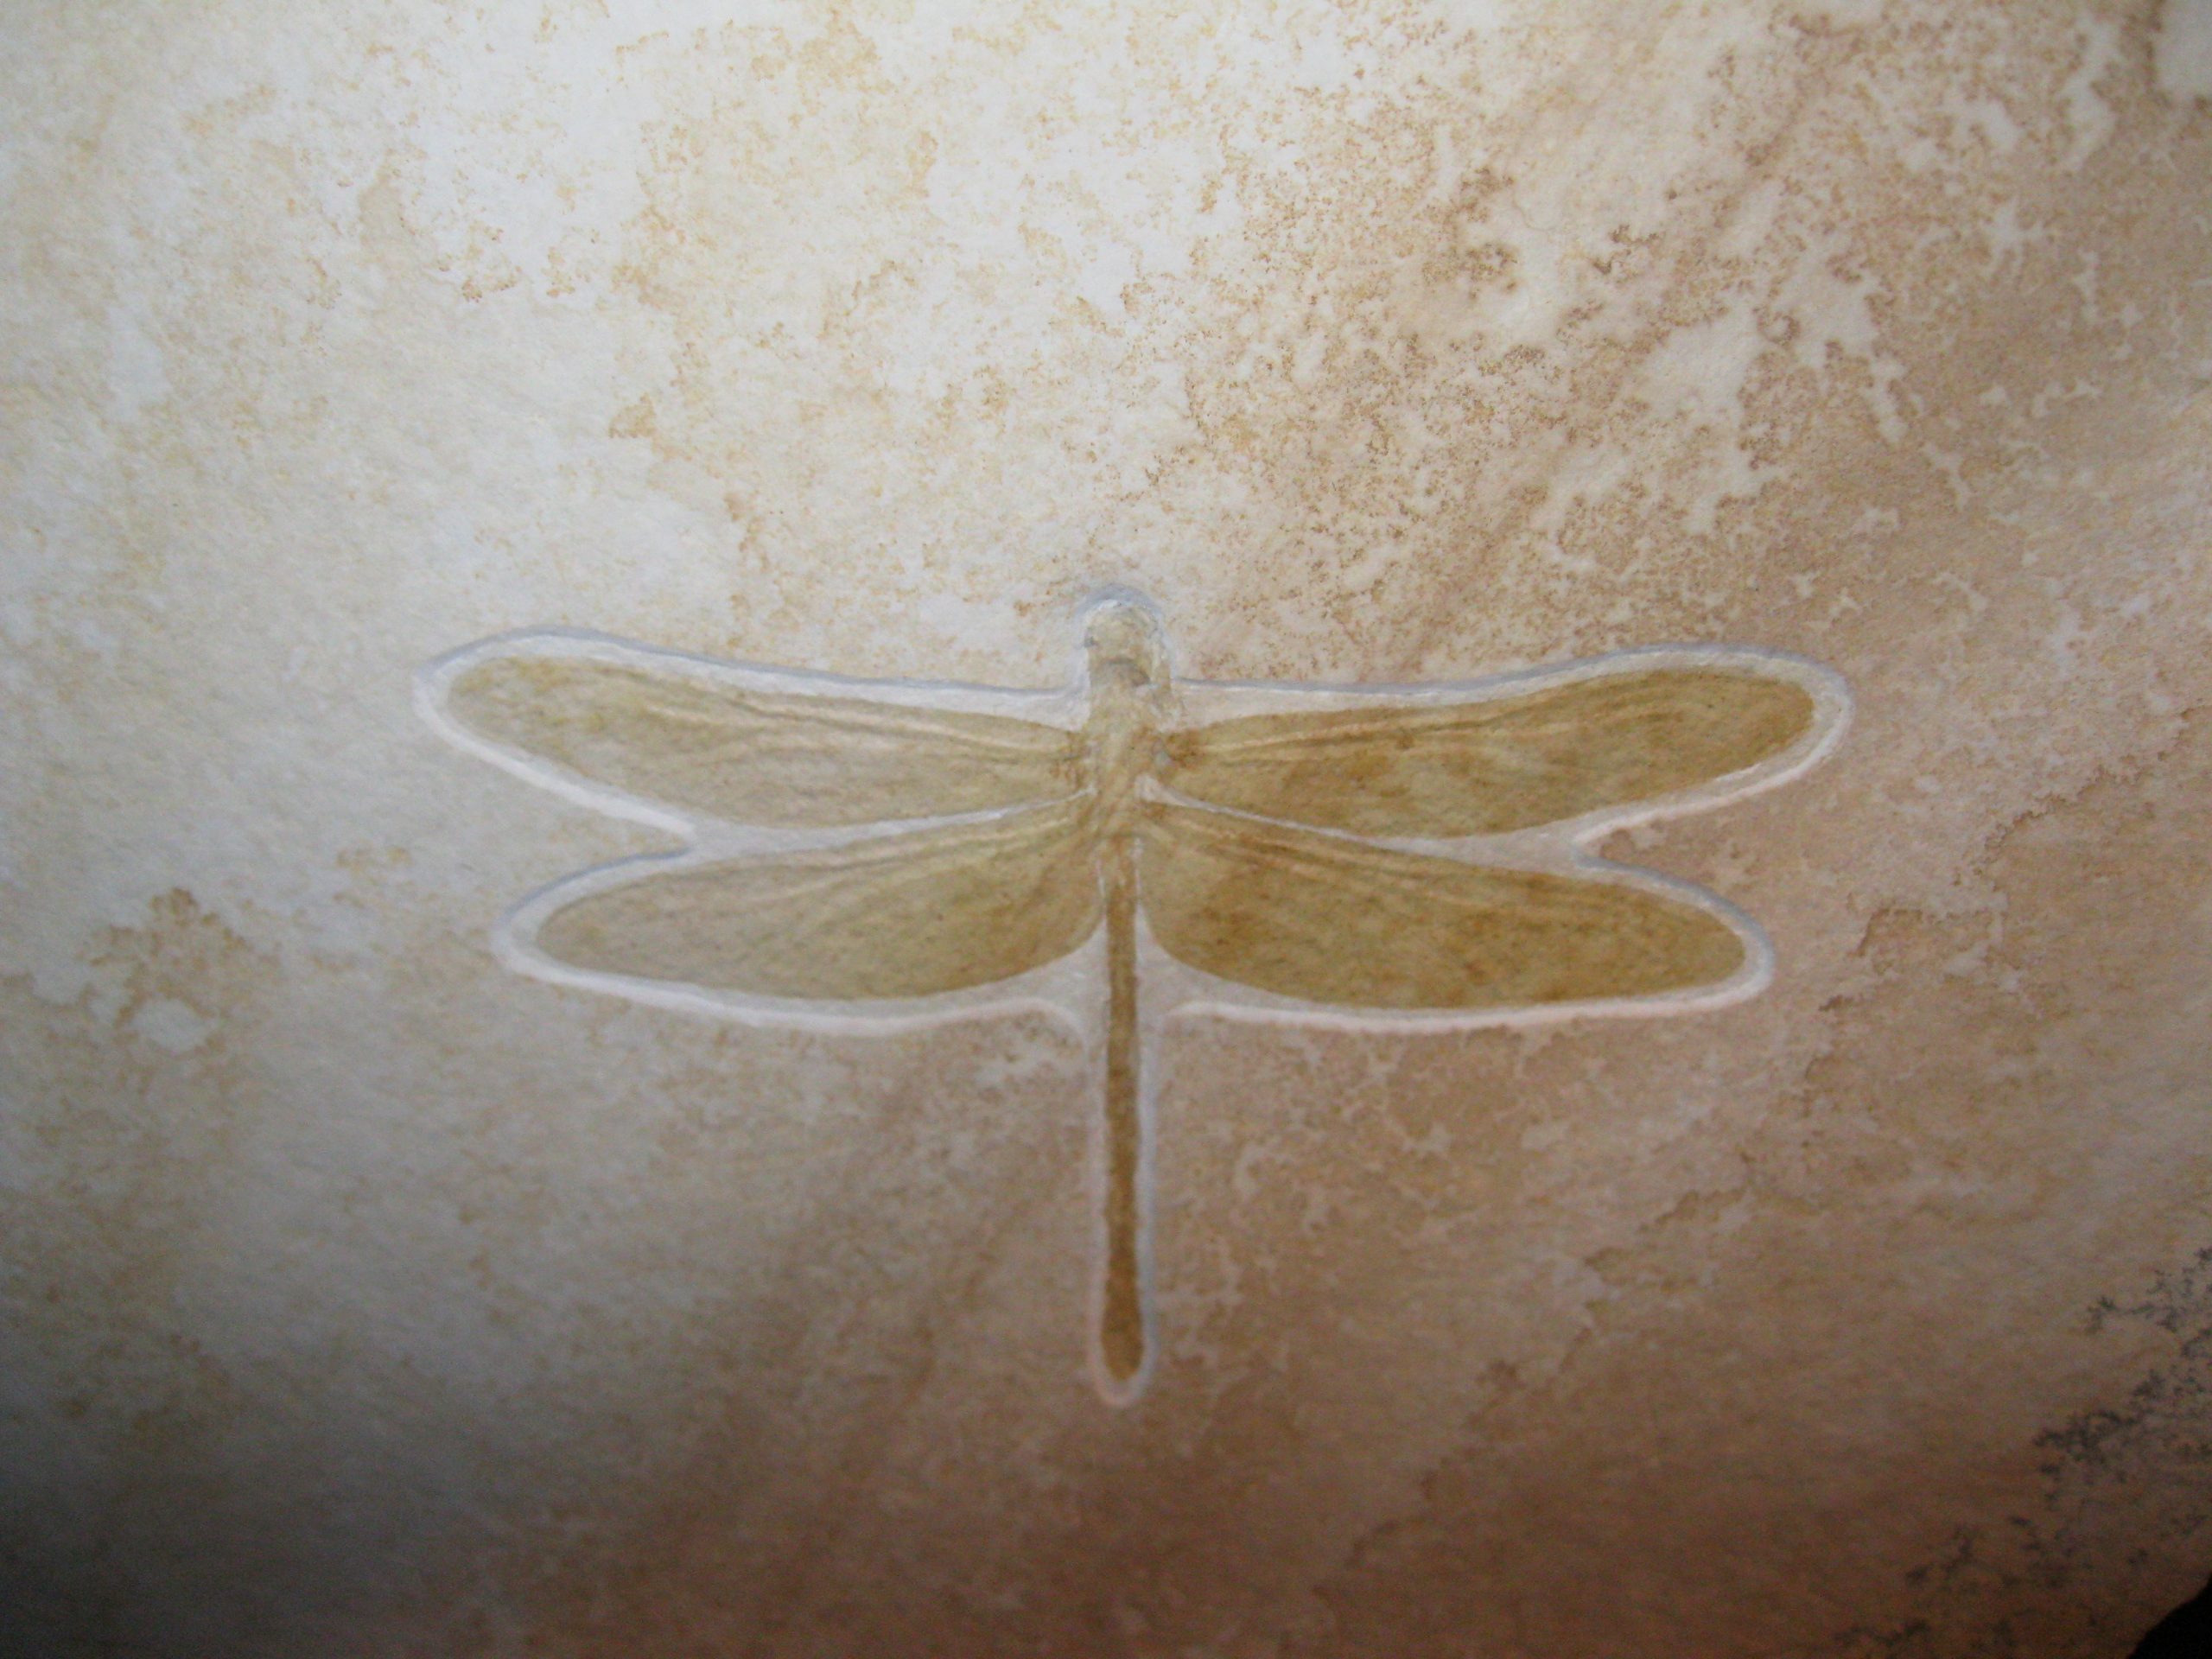 dragonfly-fossil